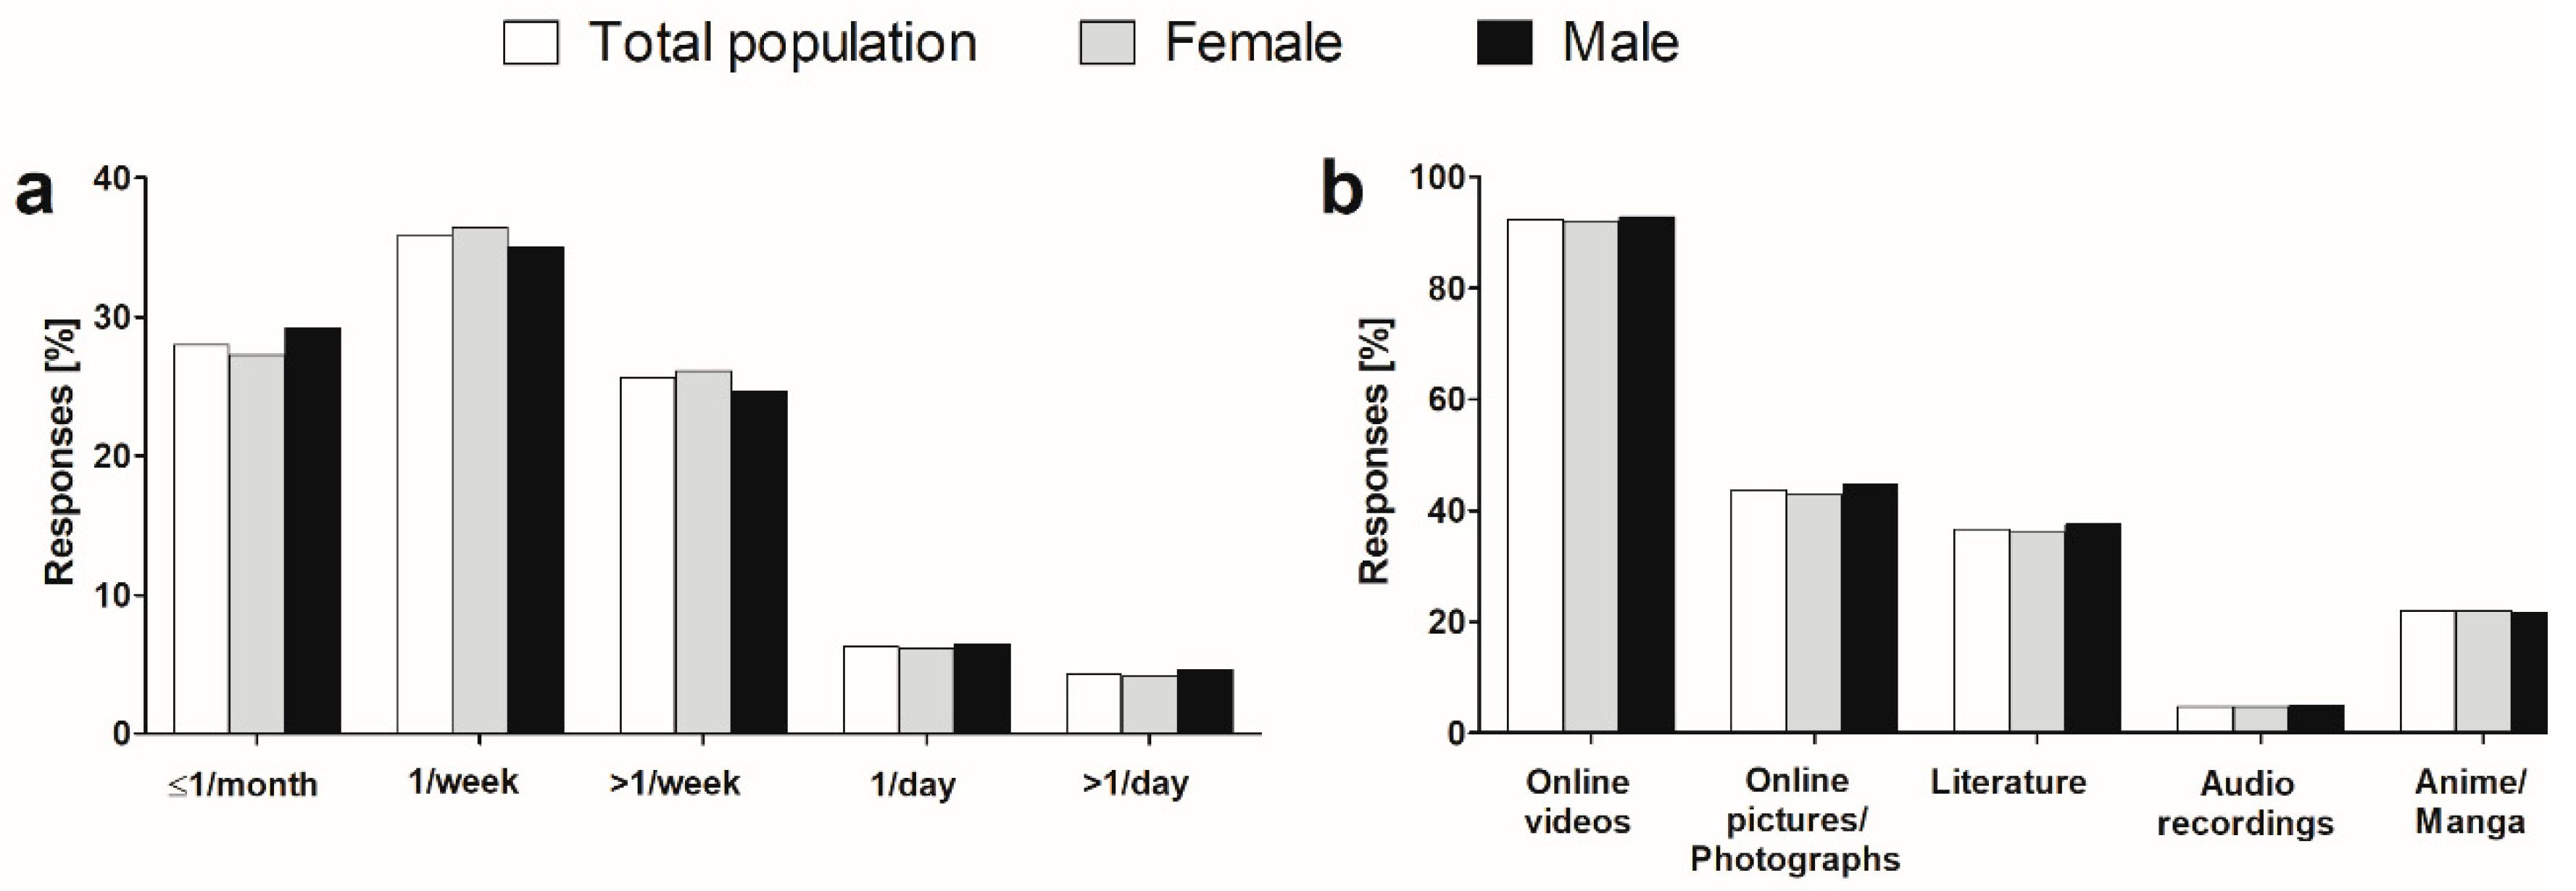 Xxx Com Video2018 - IJERPH | Free Full-Text | Prevalence, Patterns and Self-Perceived Effects  of Pornography Consumption in Polish University Students: A Cross-Sectional  Study